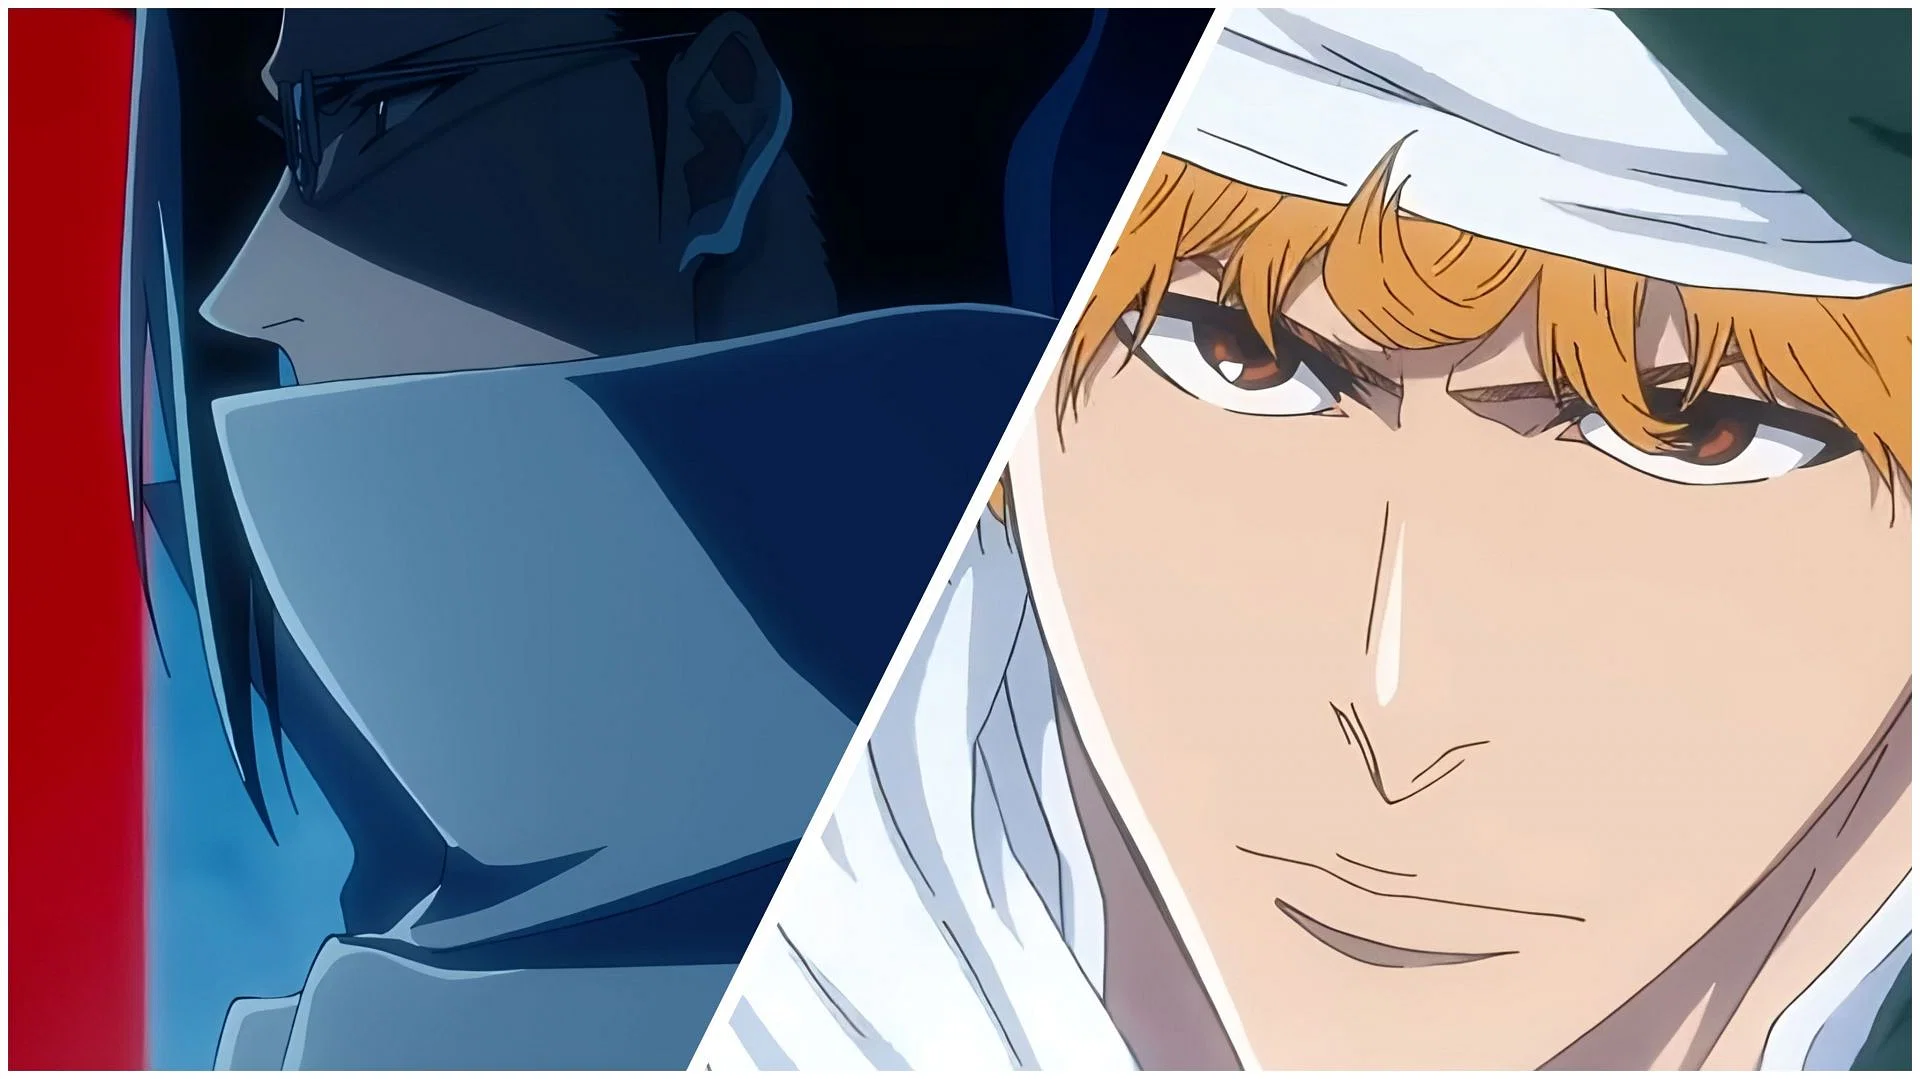 Bleach TYBW Part 2 Episode 2 Release Date, Time, Preview, Watch Online, And More